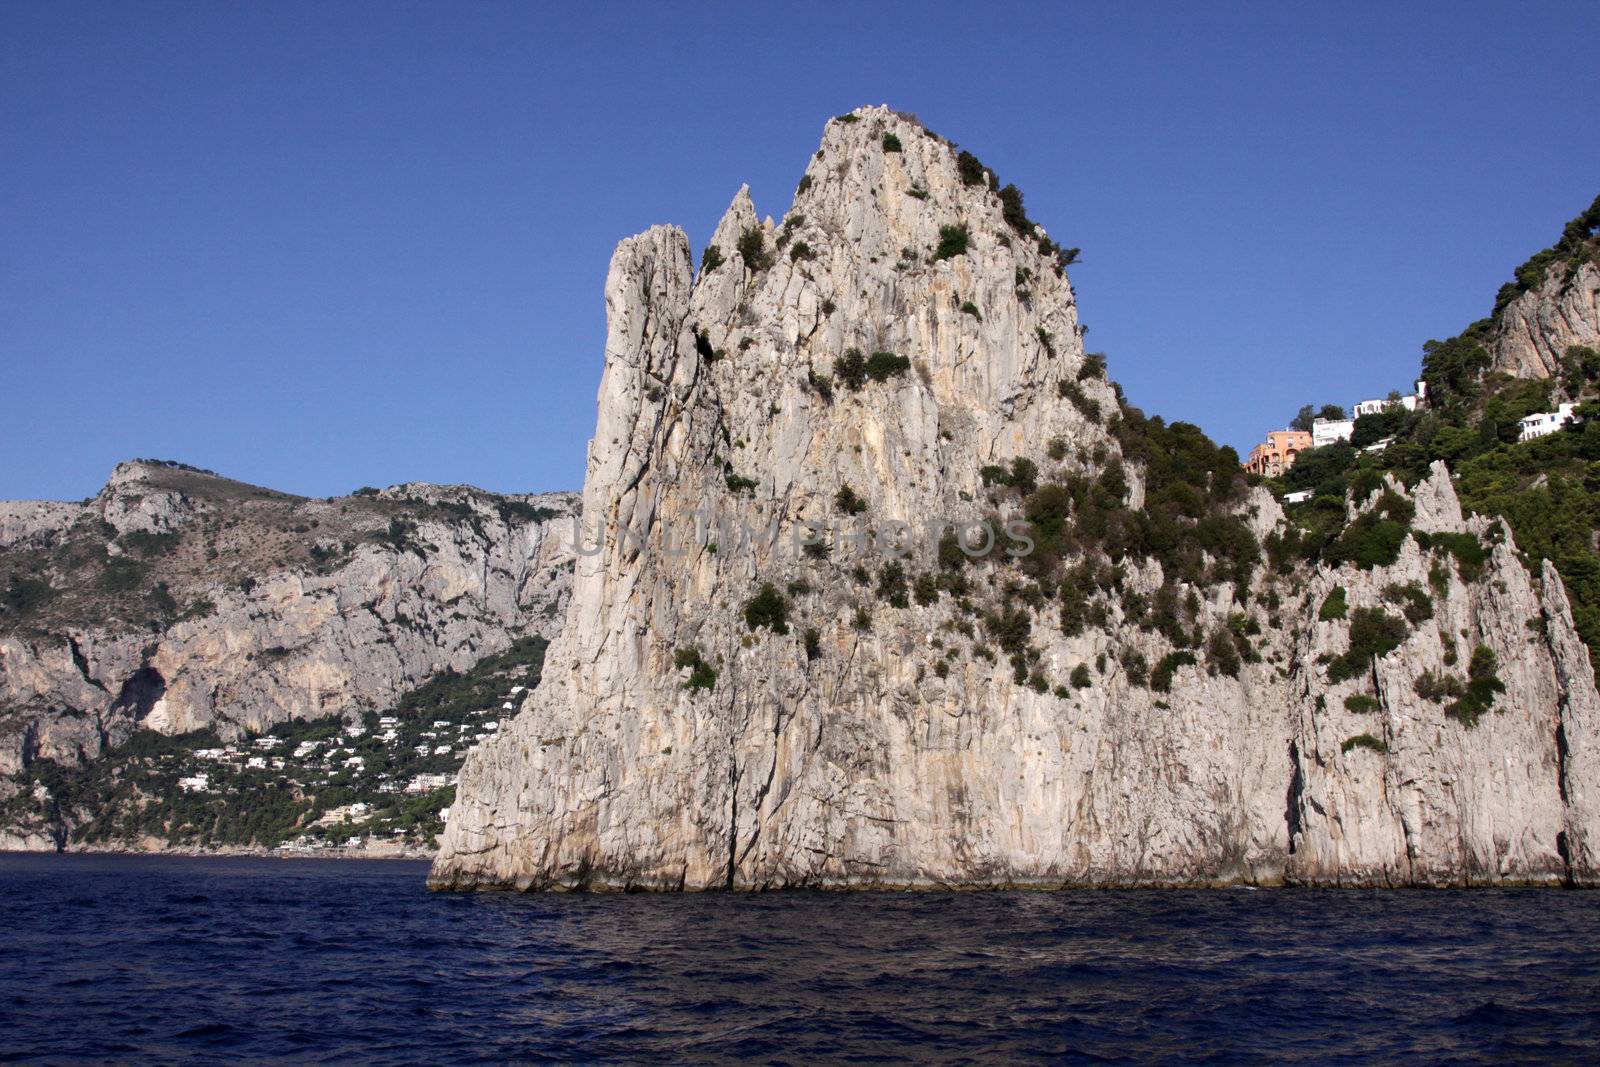 A cliff wall on the island of Capri, which is off Sorrentine peninsula in the Bay of Naples, Italy.
